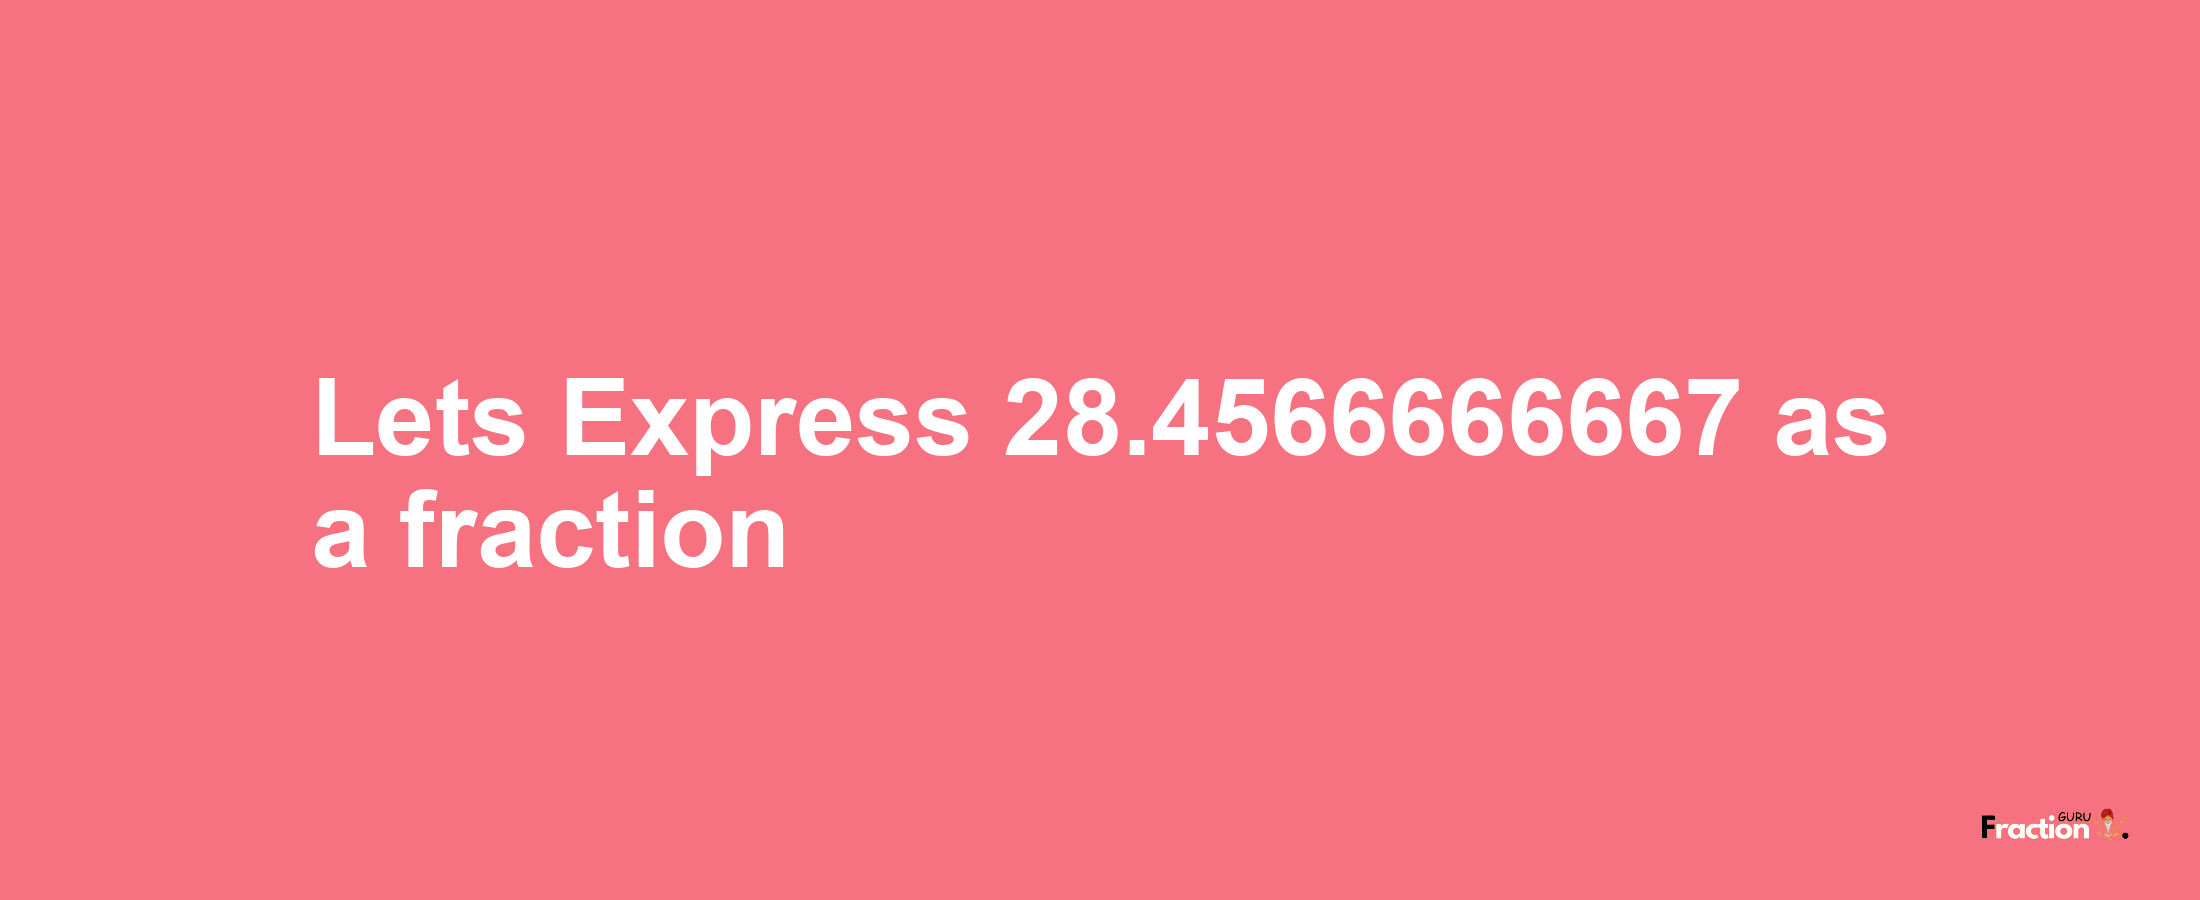 Lets Express 28.4566666667 as afraction